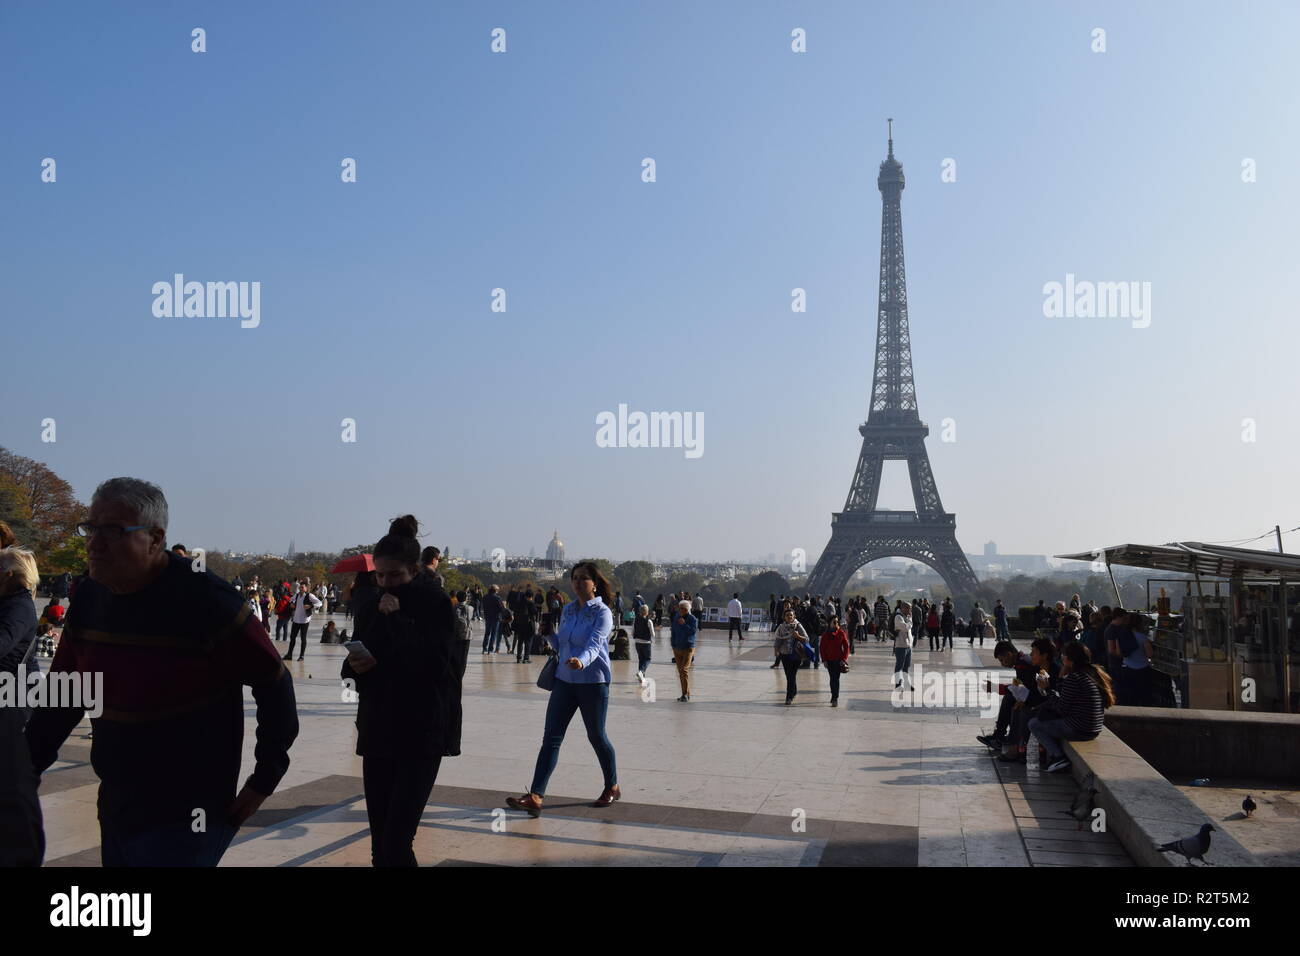 Tourists take in the iconic view of the Eiffel Tower from the terrace at Trocadero Paris, France Stock Photo